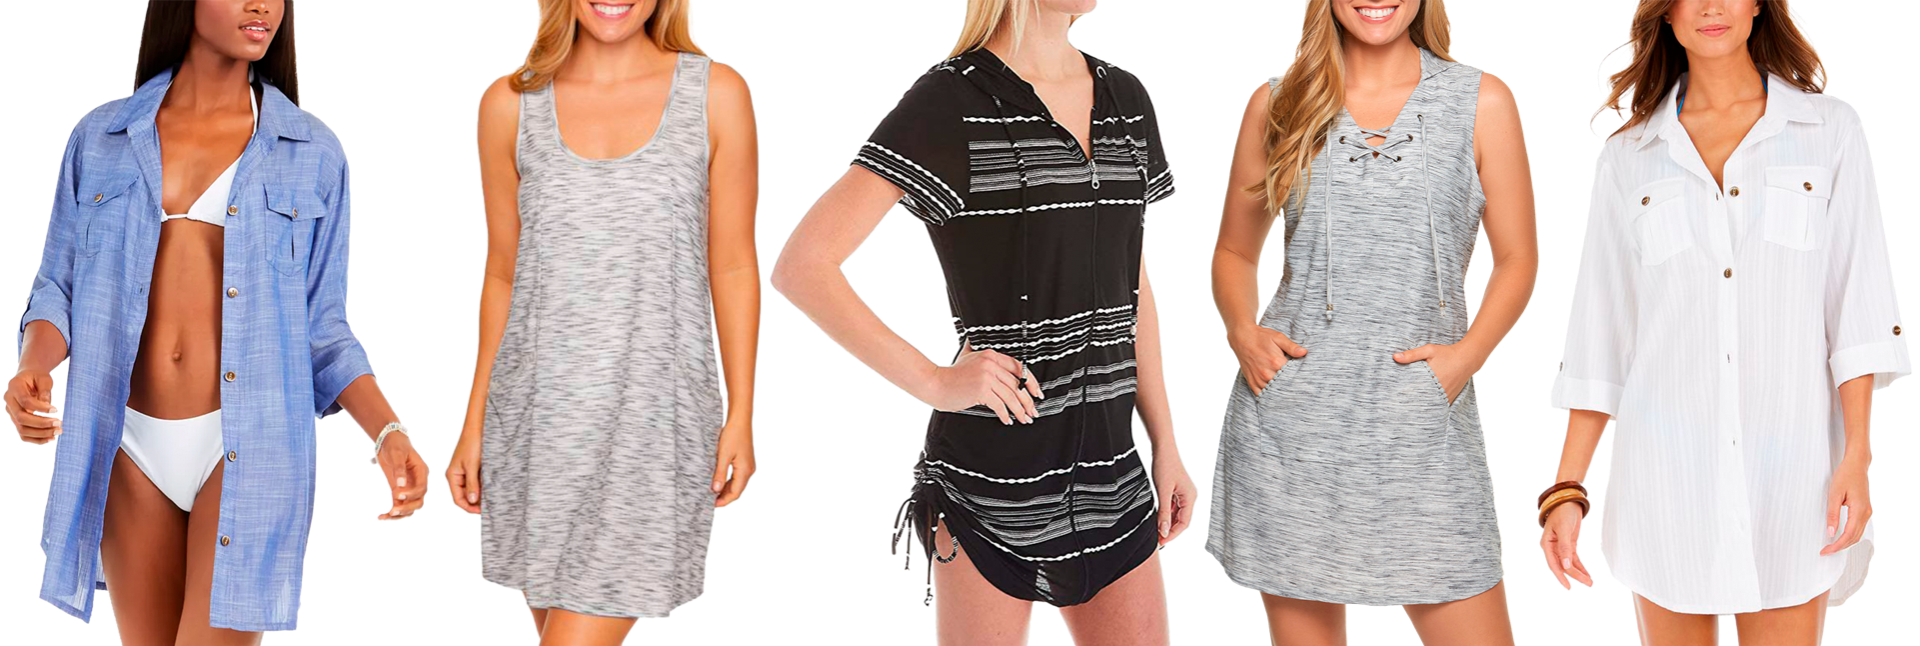 ''Women's Fashion Button-Down & Slip-On Cover-Ups - DENIM, Heathered, & Solid Print - Sizes Small-XL''